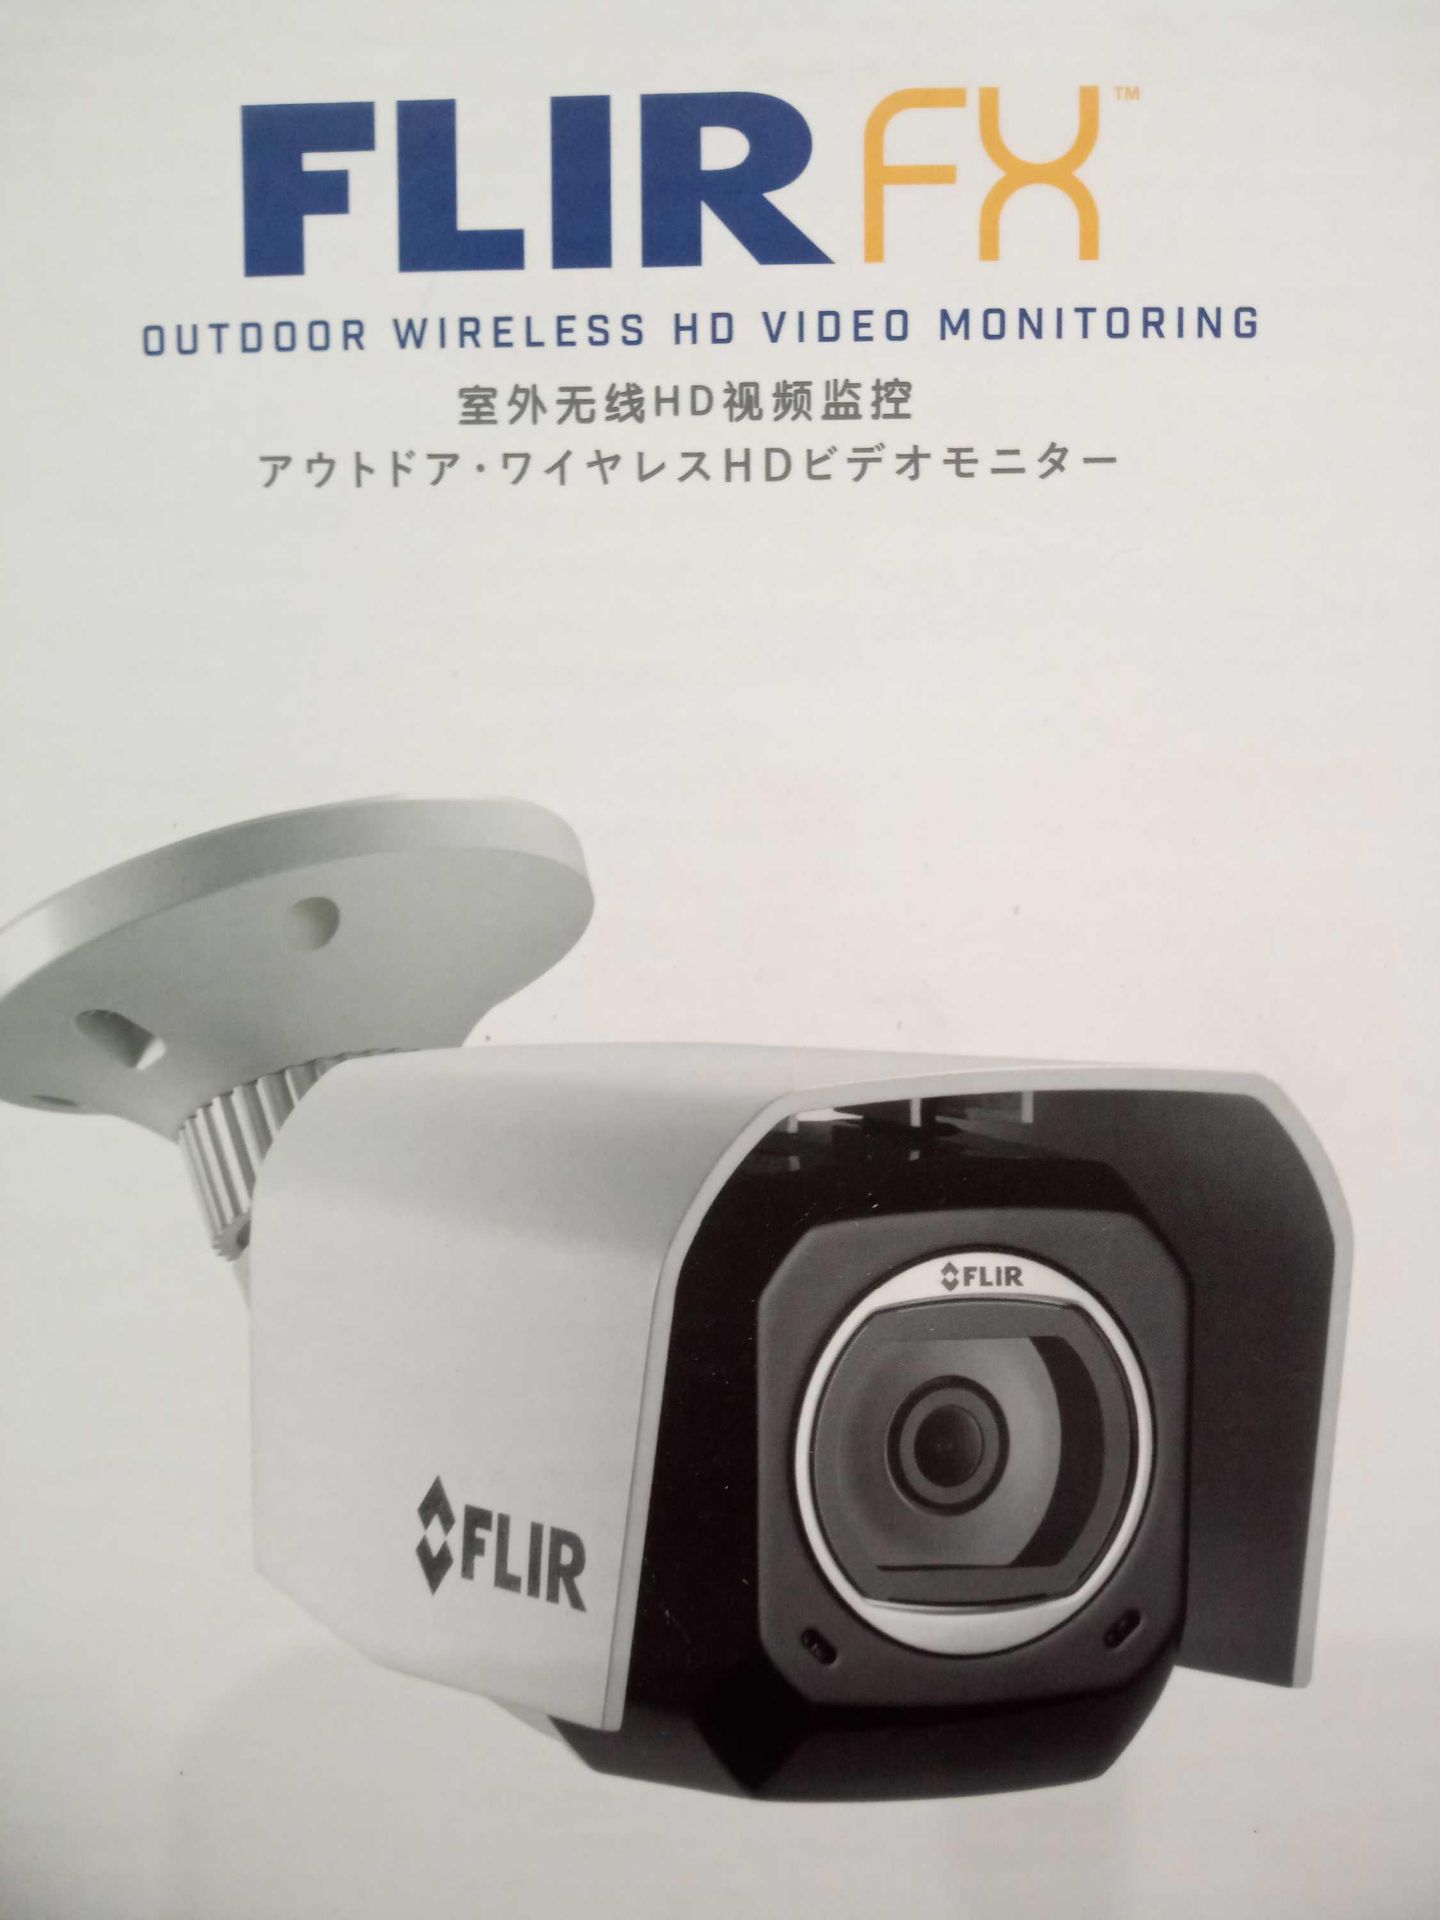 Rrp £300 Boxed Flir Fx Outfit Wireless Hd Video Monitoring Cctv Camera